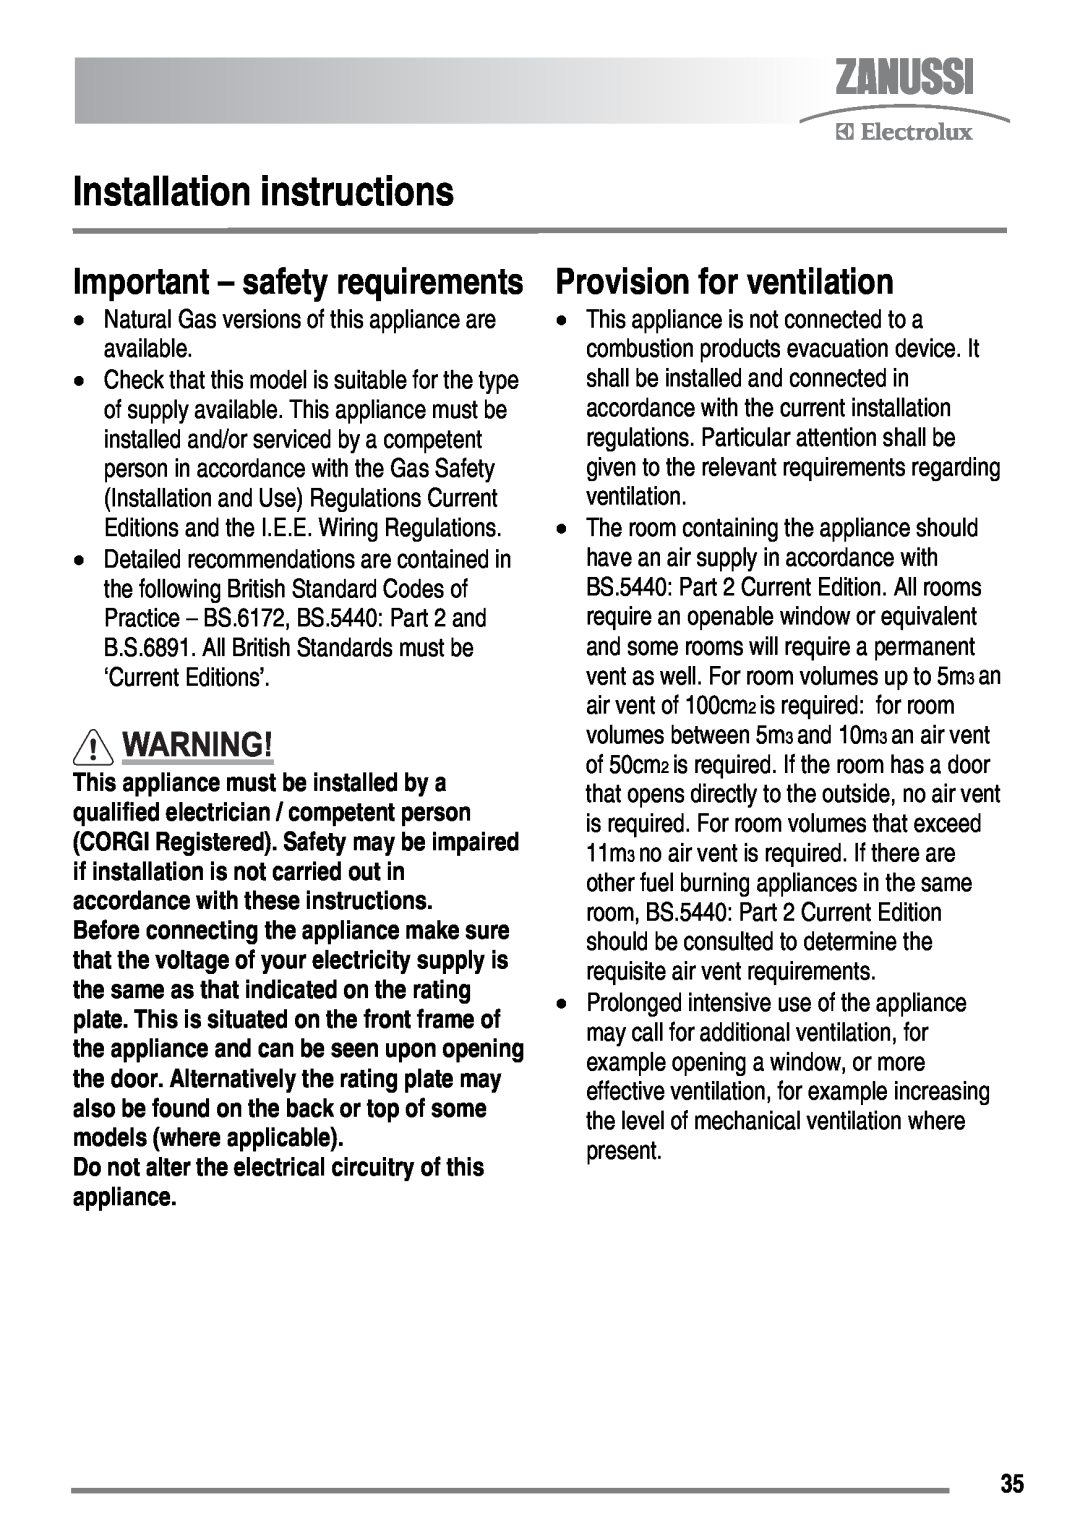 Zanussi FH10 user manual Installation instructions, Provision for ventilation, Important - safety requirements 